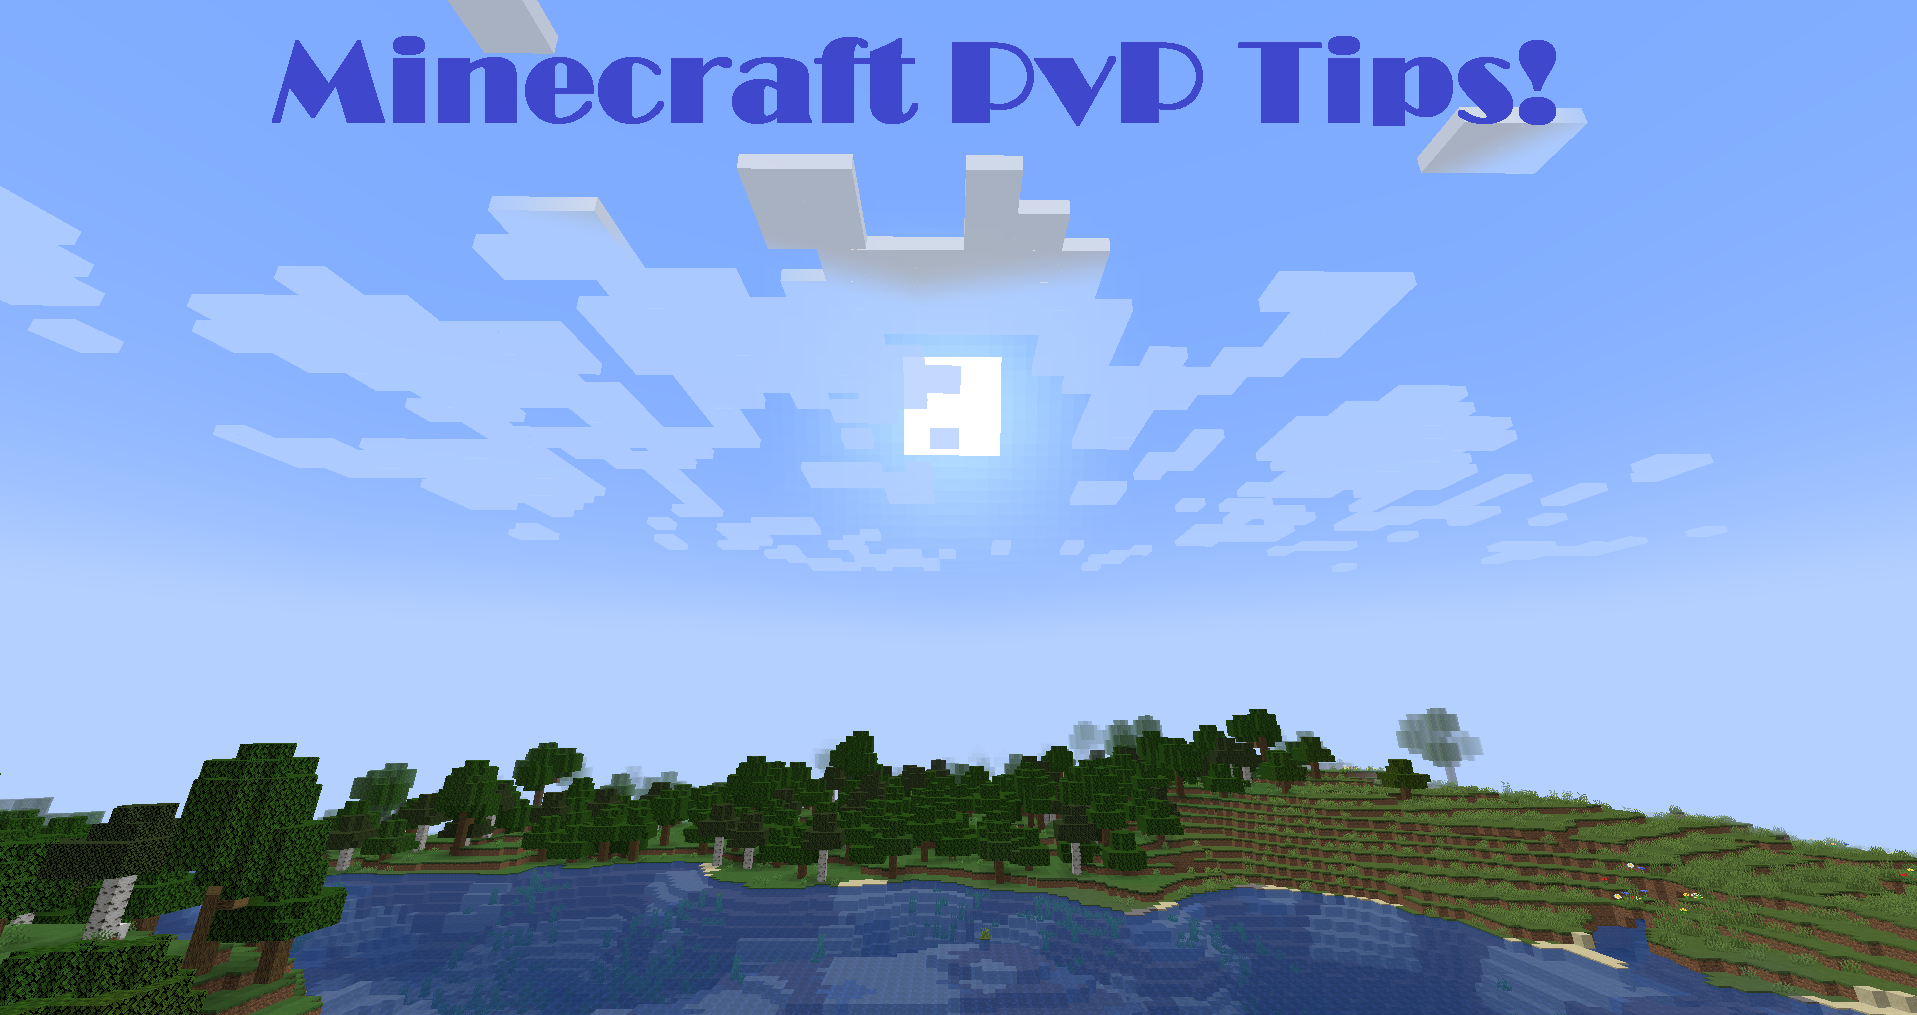 Top 5 Tips for PVP in Minecraft